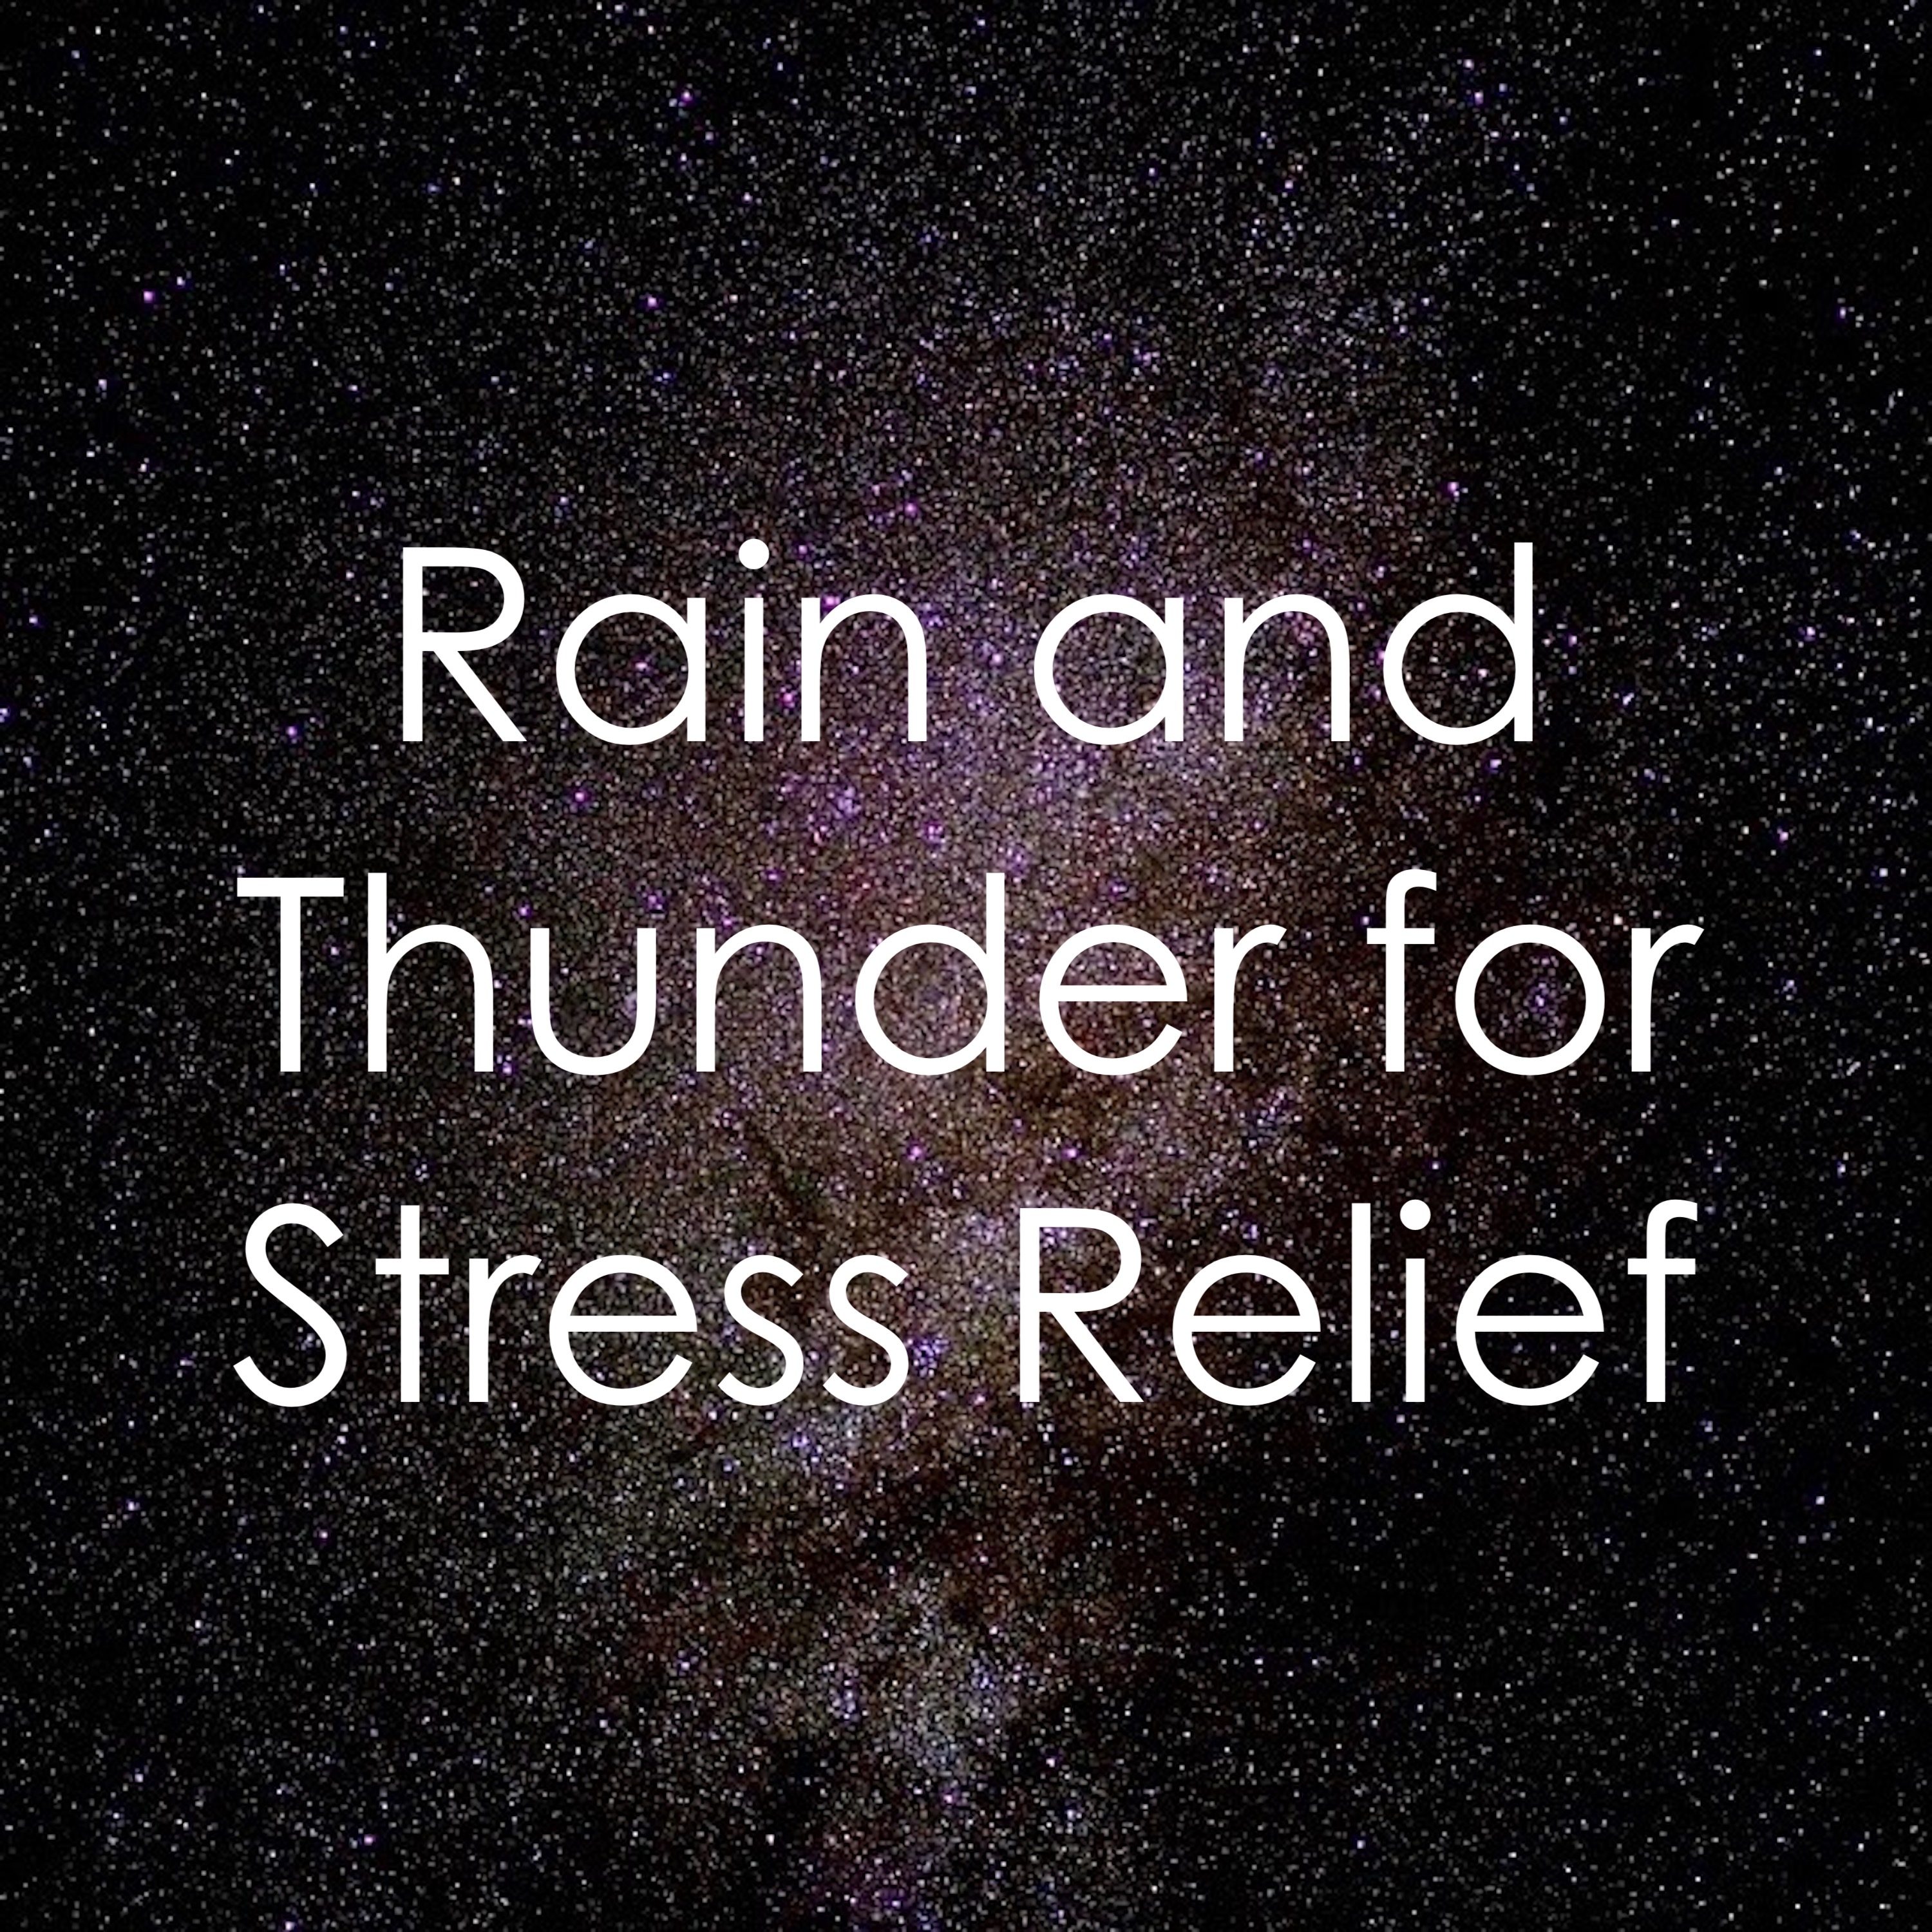 19 Sounds of Rain and Thunder for Stress Relief